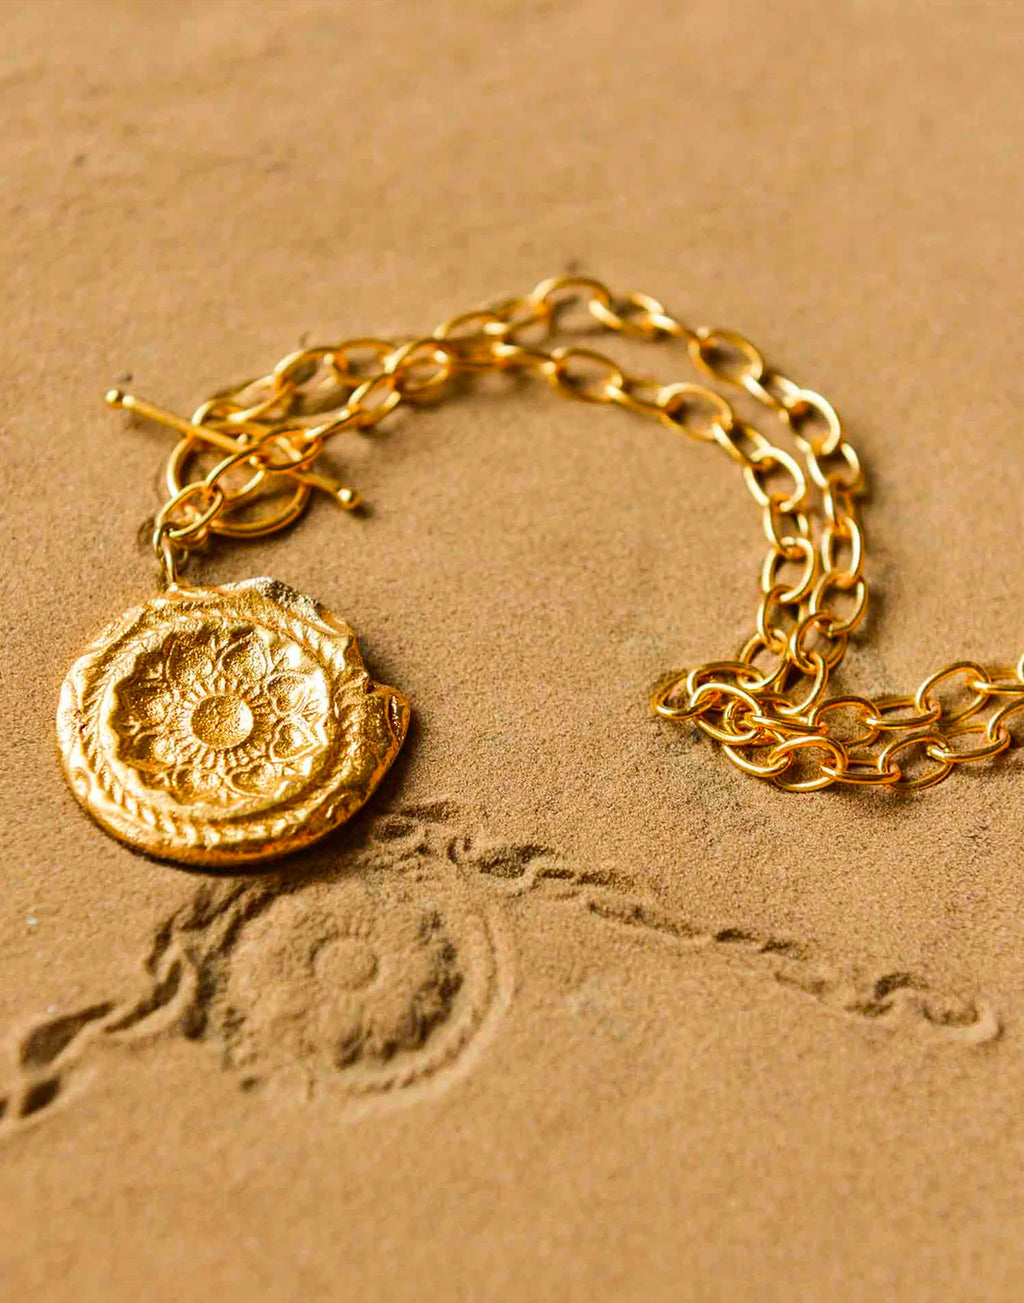 Fossil Shackle 4 Necklace - Statement Necklaces - Gold-Plated & Hypoallergenic Jewellery - Made in India - Dubai Jewellery - Dori